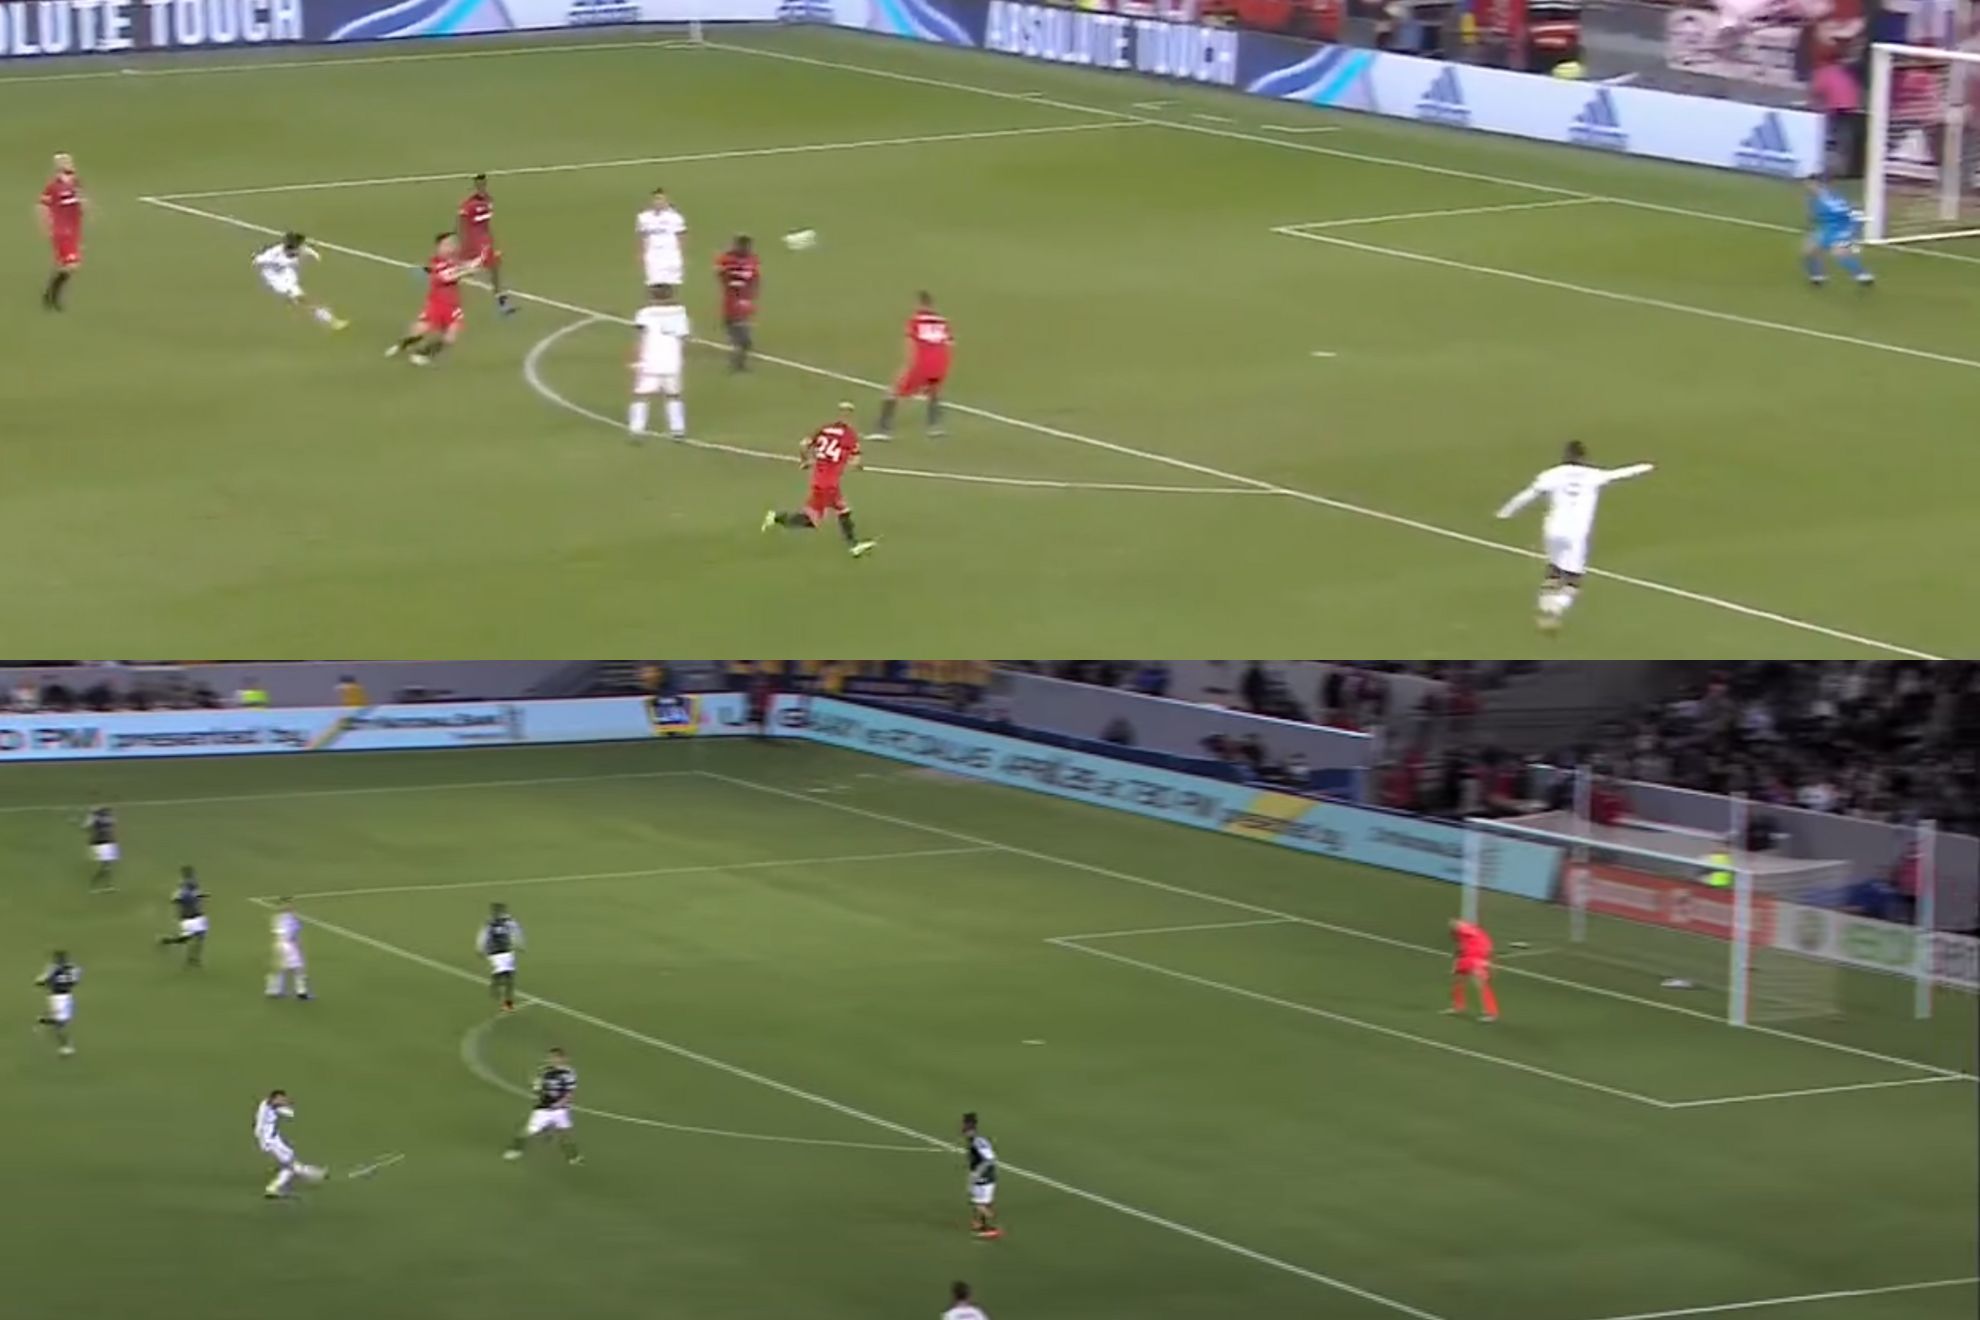 Riqui Puig scores his first MLS goal against Toronto FC (Top image). Beckham scores against Timbers in 2012 (Bottom). - TSN/MLS